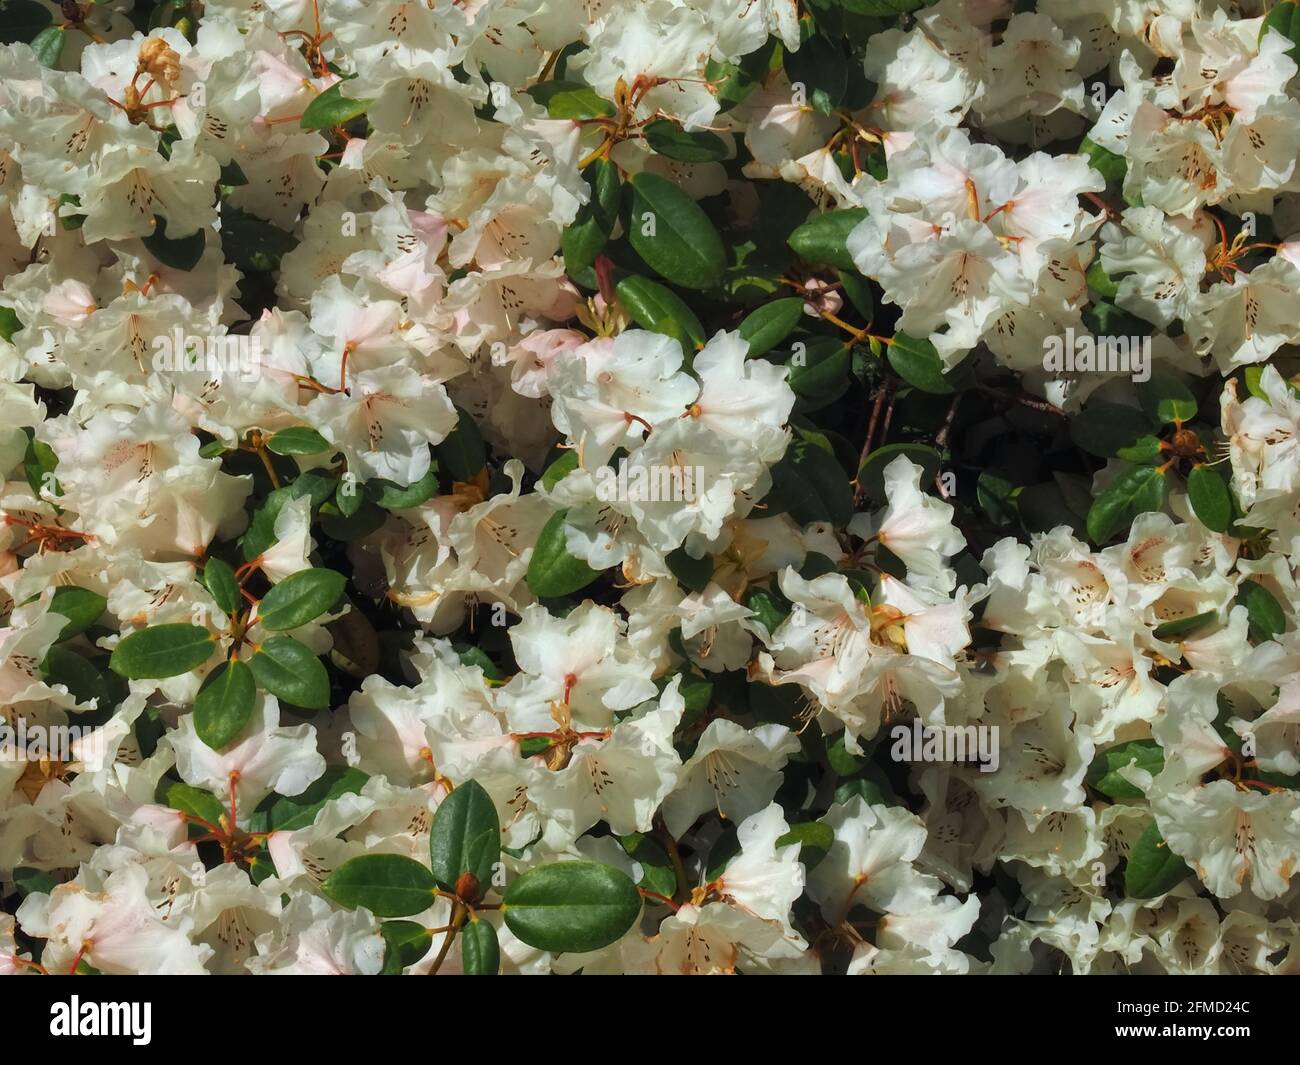 Big white blooming rhododendron tree Stock Photo